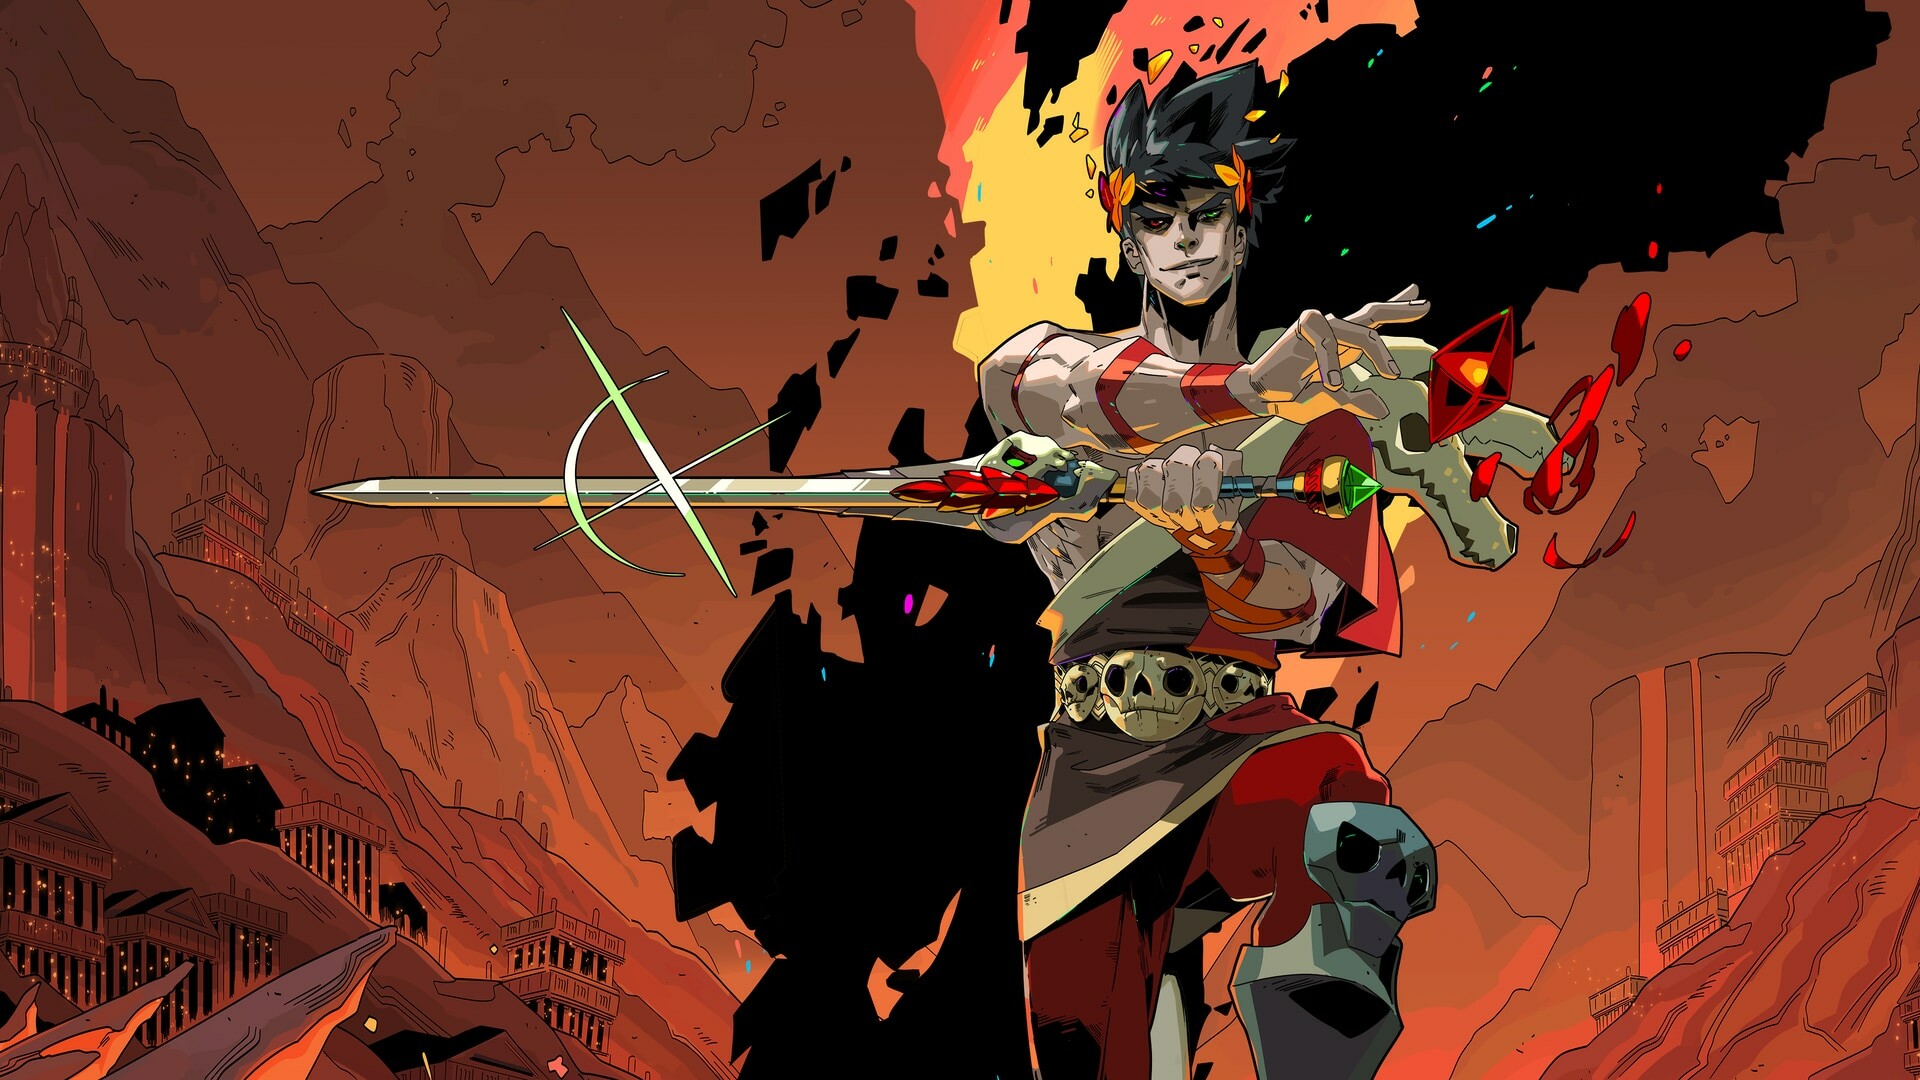 Hades: Zagreus, Prince of the Underworld, The protagonist of the game. 1920x1080 Full HD Wallpaper.